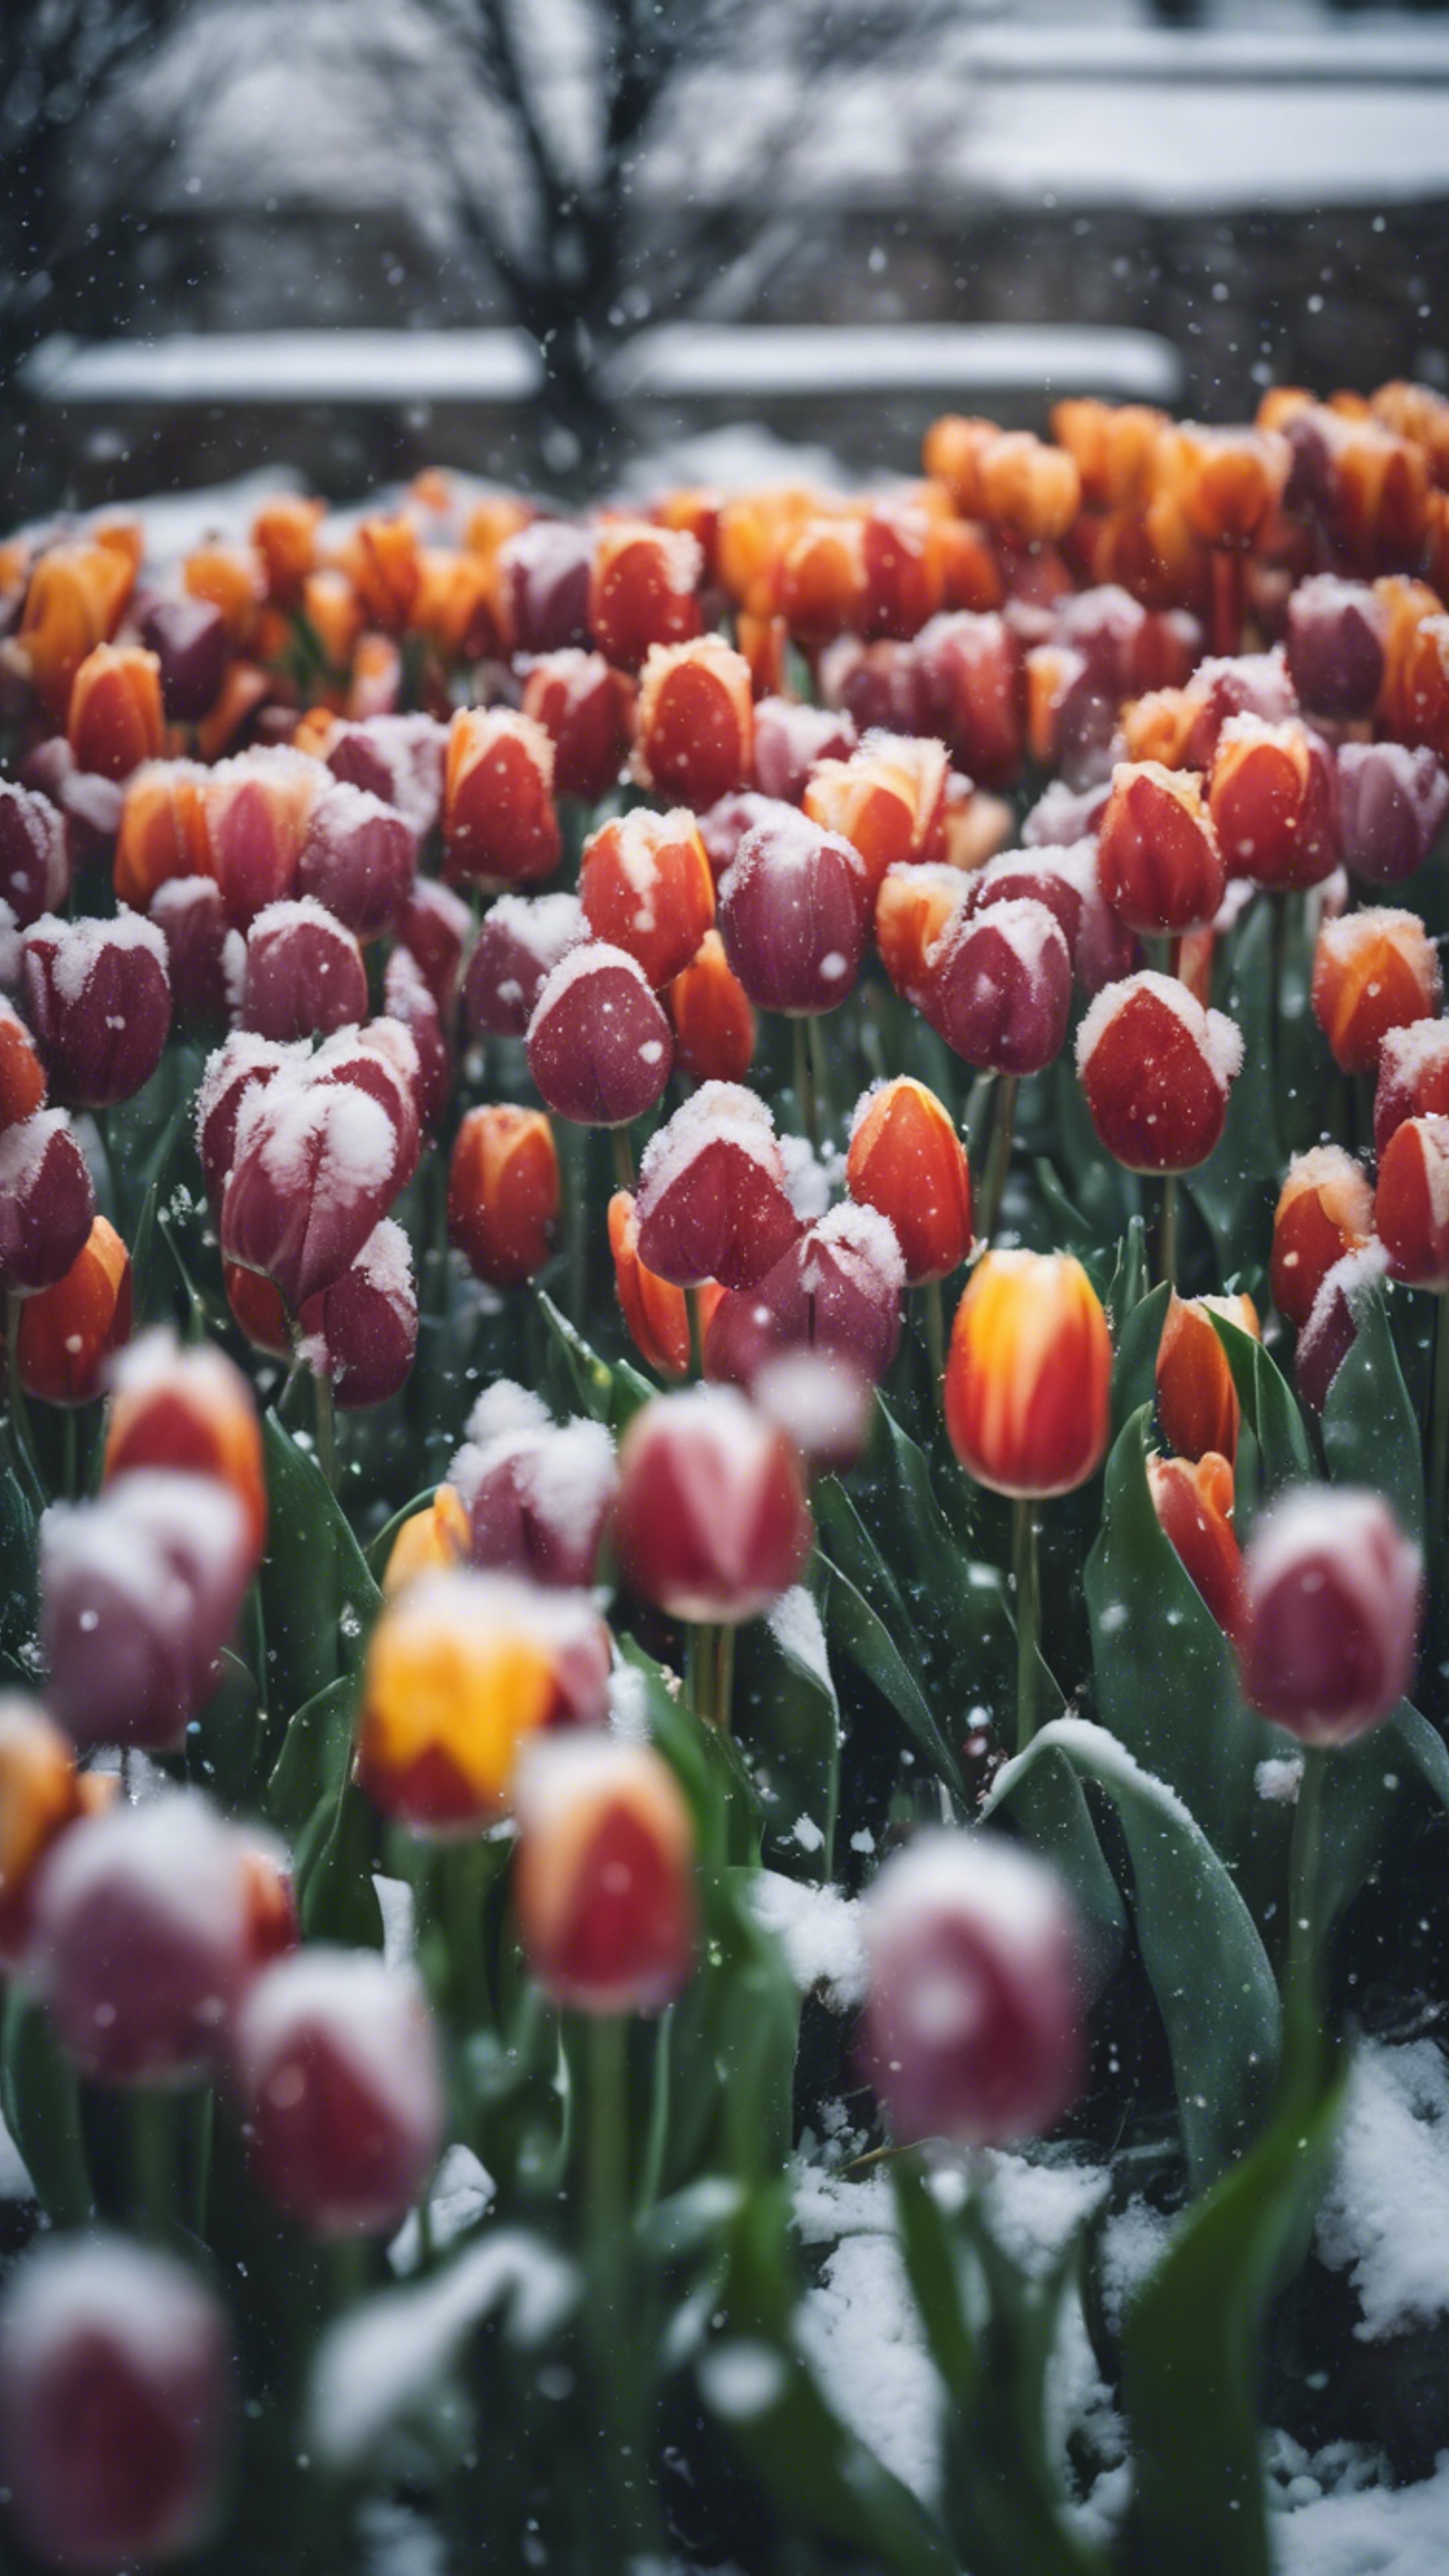 A patch of colorful tulips partially covered by a late spring snowfall. Behang[bcf7f5ed51ad49e88f7f]